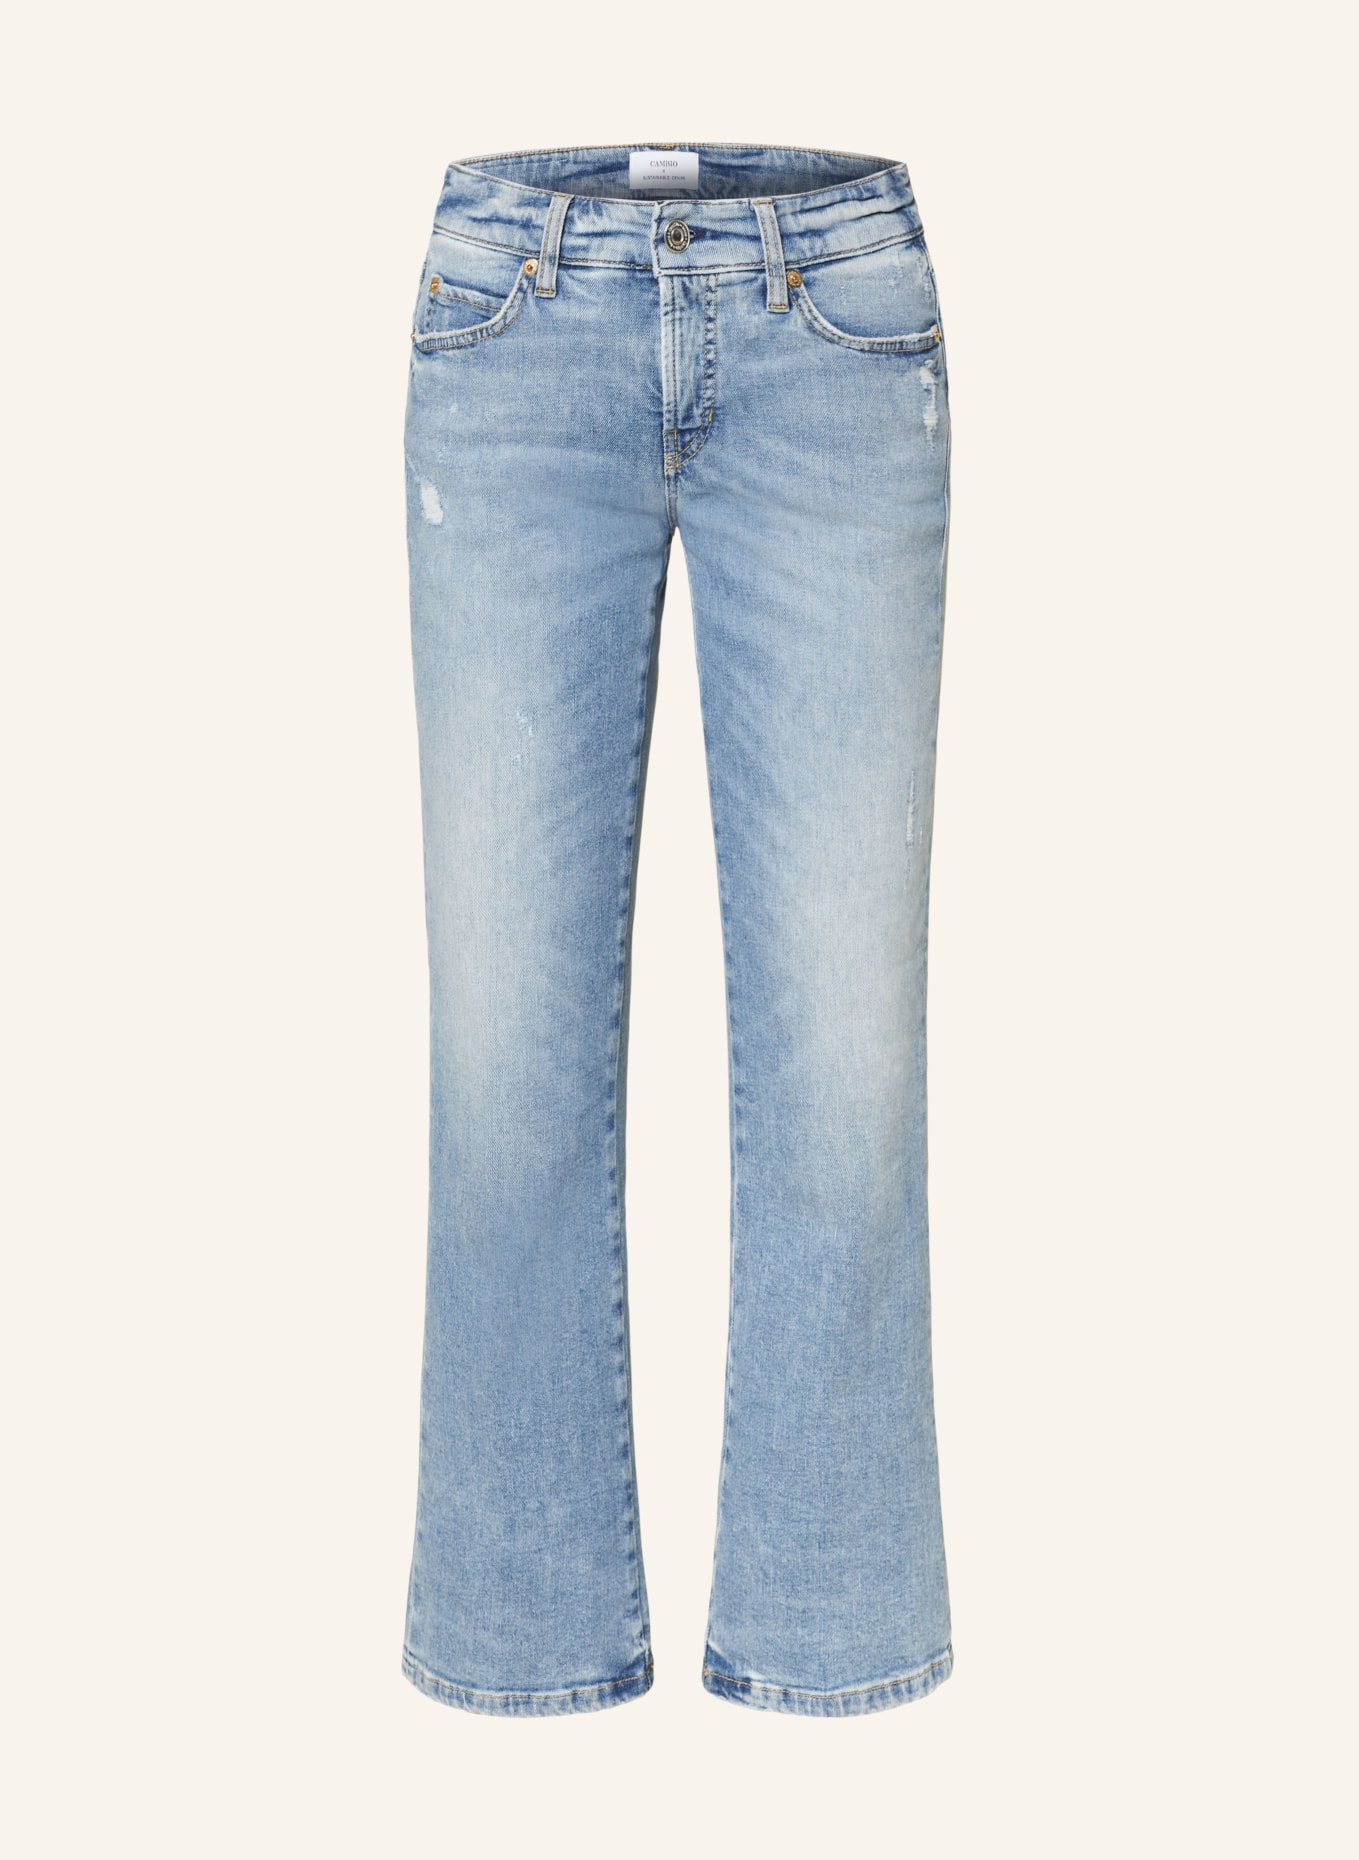 CAMBIO Jeans FRANCESCA, Color: 5237 authentic hemp well worn (Image 1)